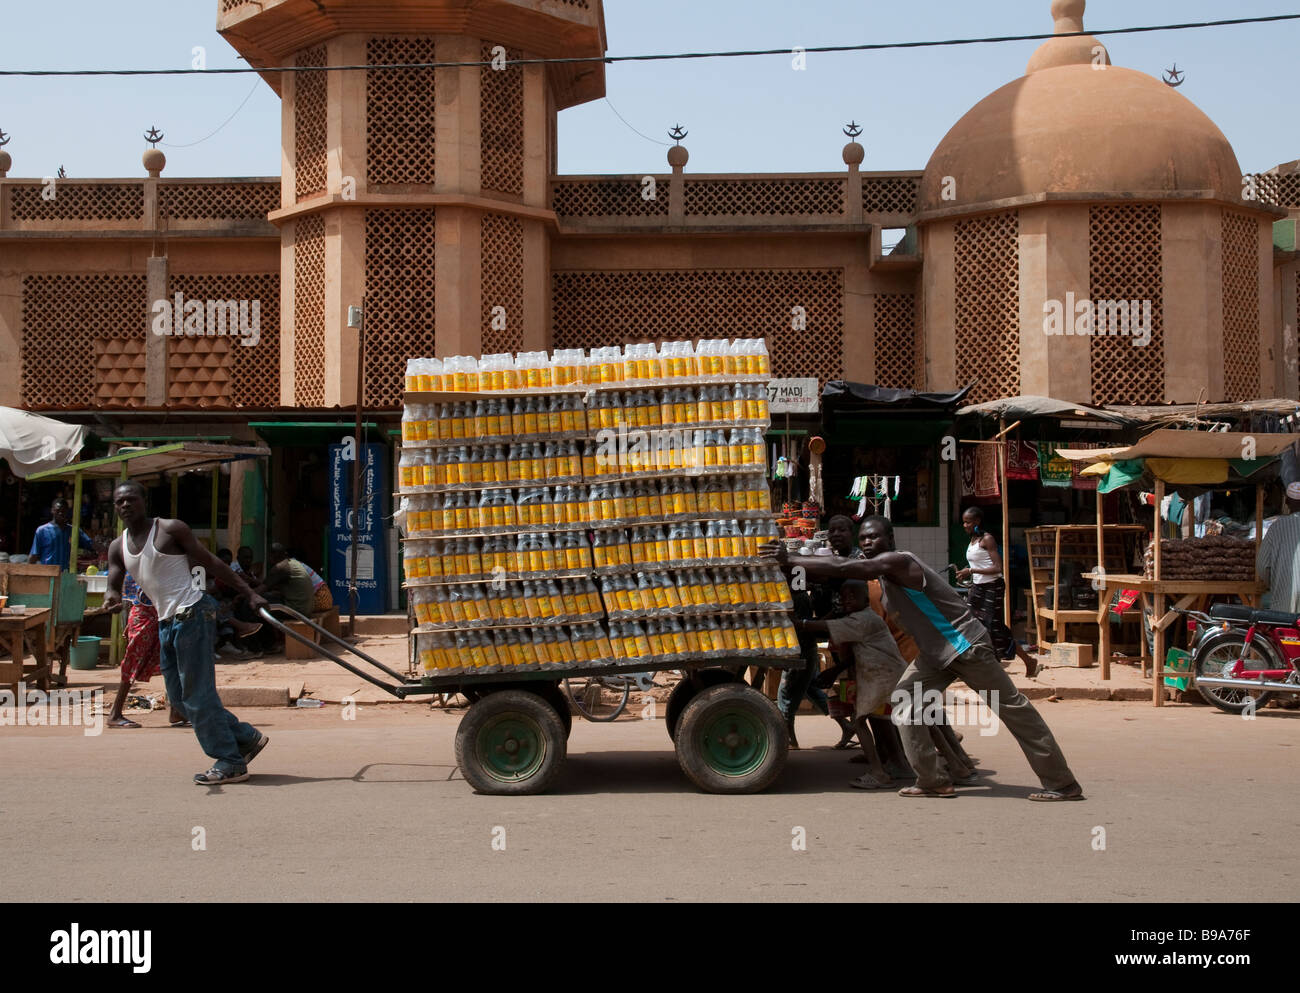 West Africa Burkina Fasso Ougadougou 3 porters pulling a heavy cart loaded with bottles Stock Photo